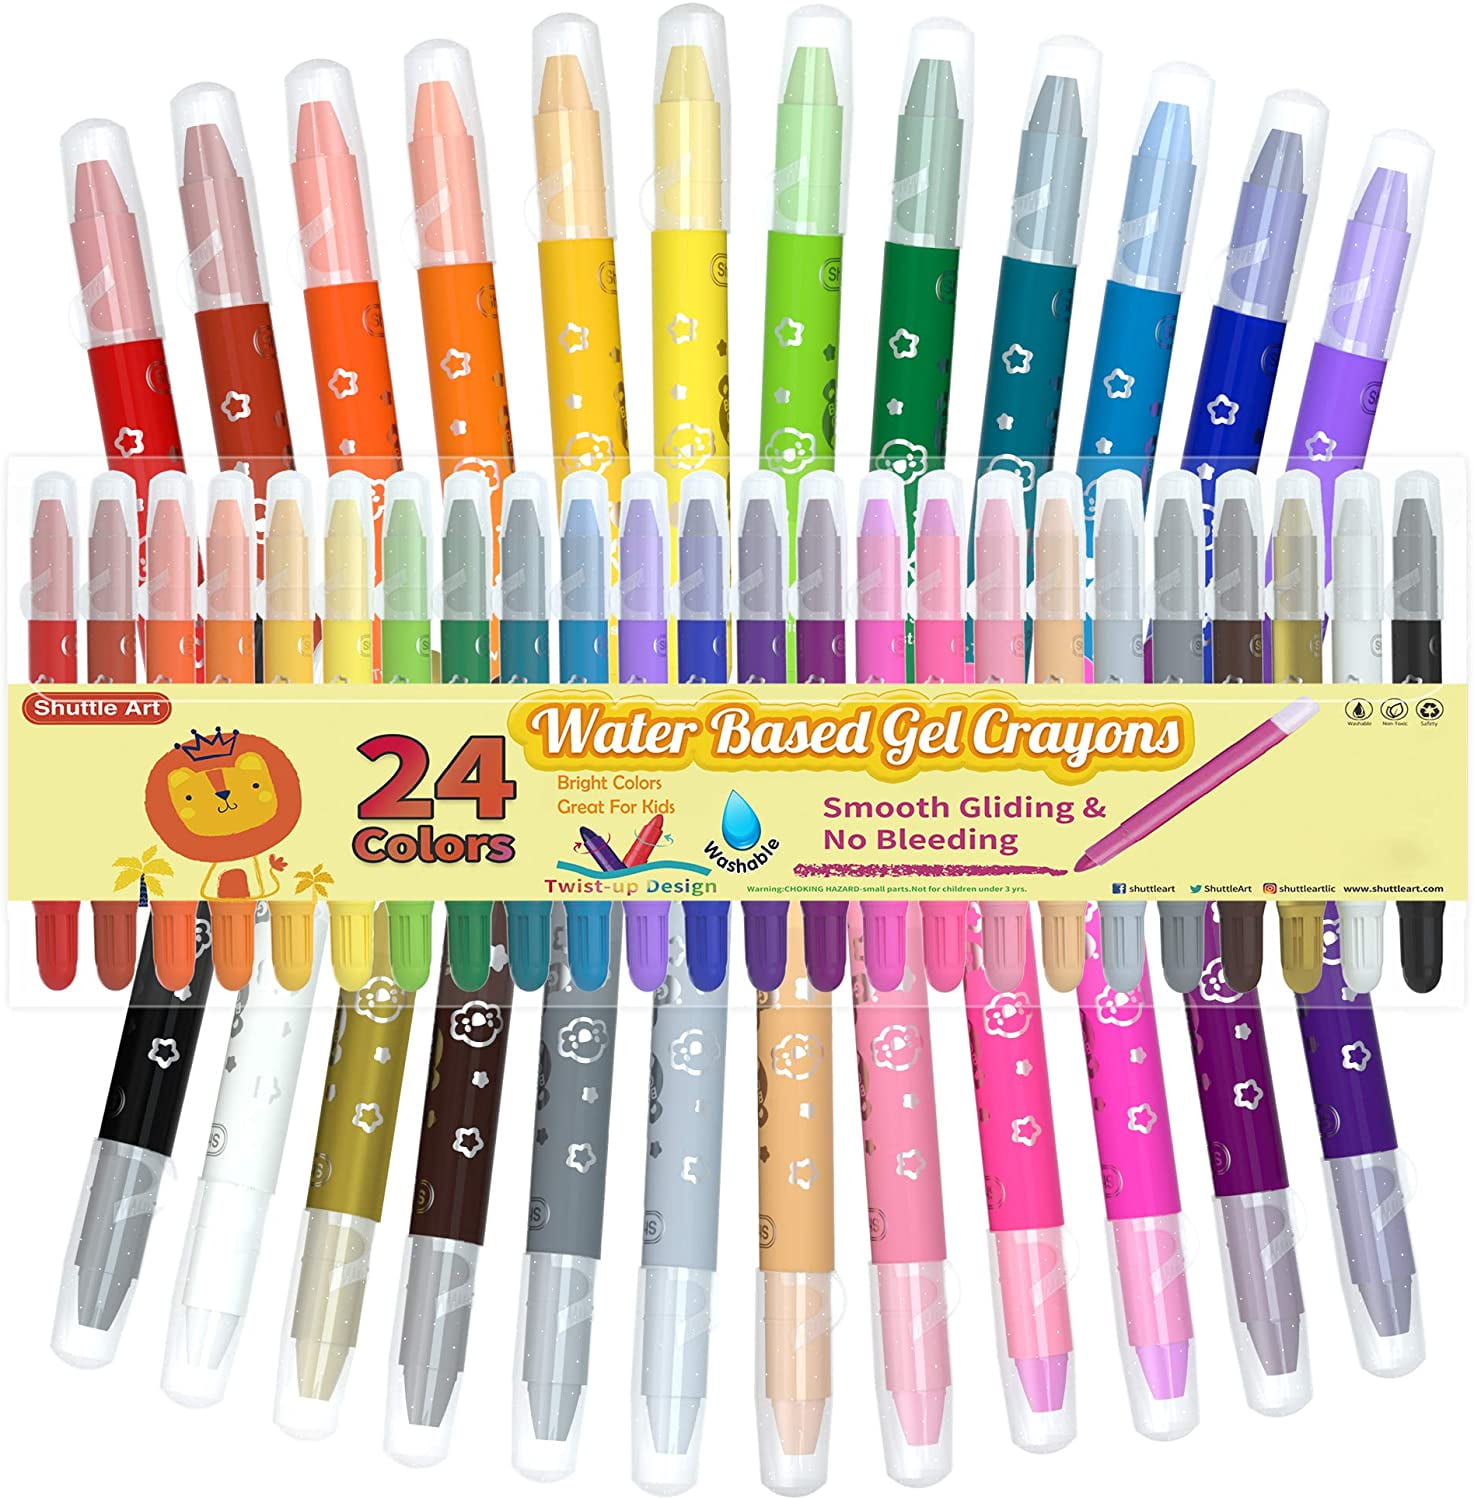 Xmmswdla Crayons for Kids Ages 4-8 B Pentriangular Plastic Crayon Children's Crayon Not Dirty Hands Safe Washable Toddler Painting Brush Baby Graffiti